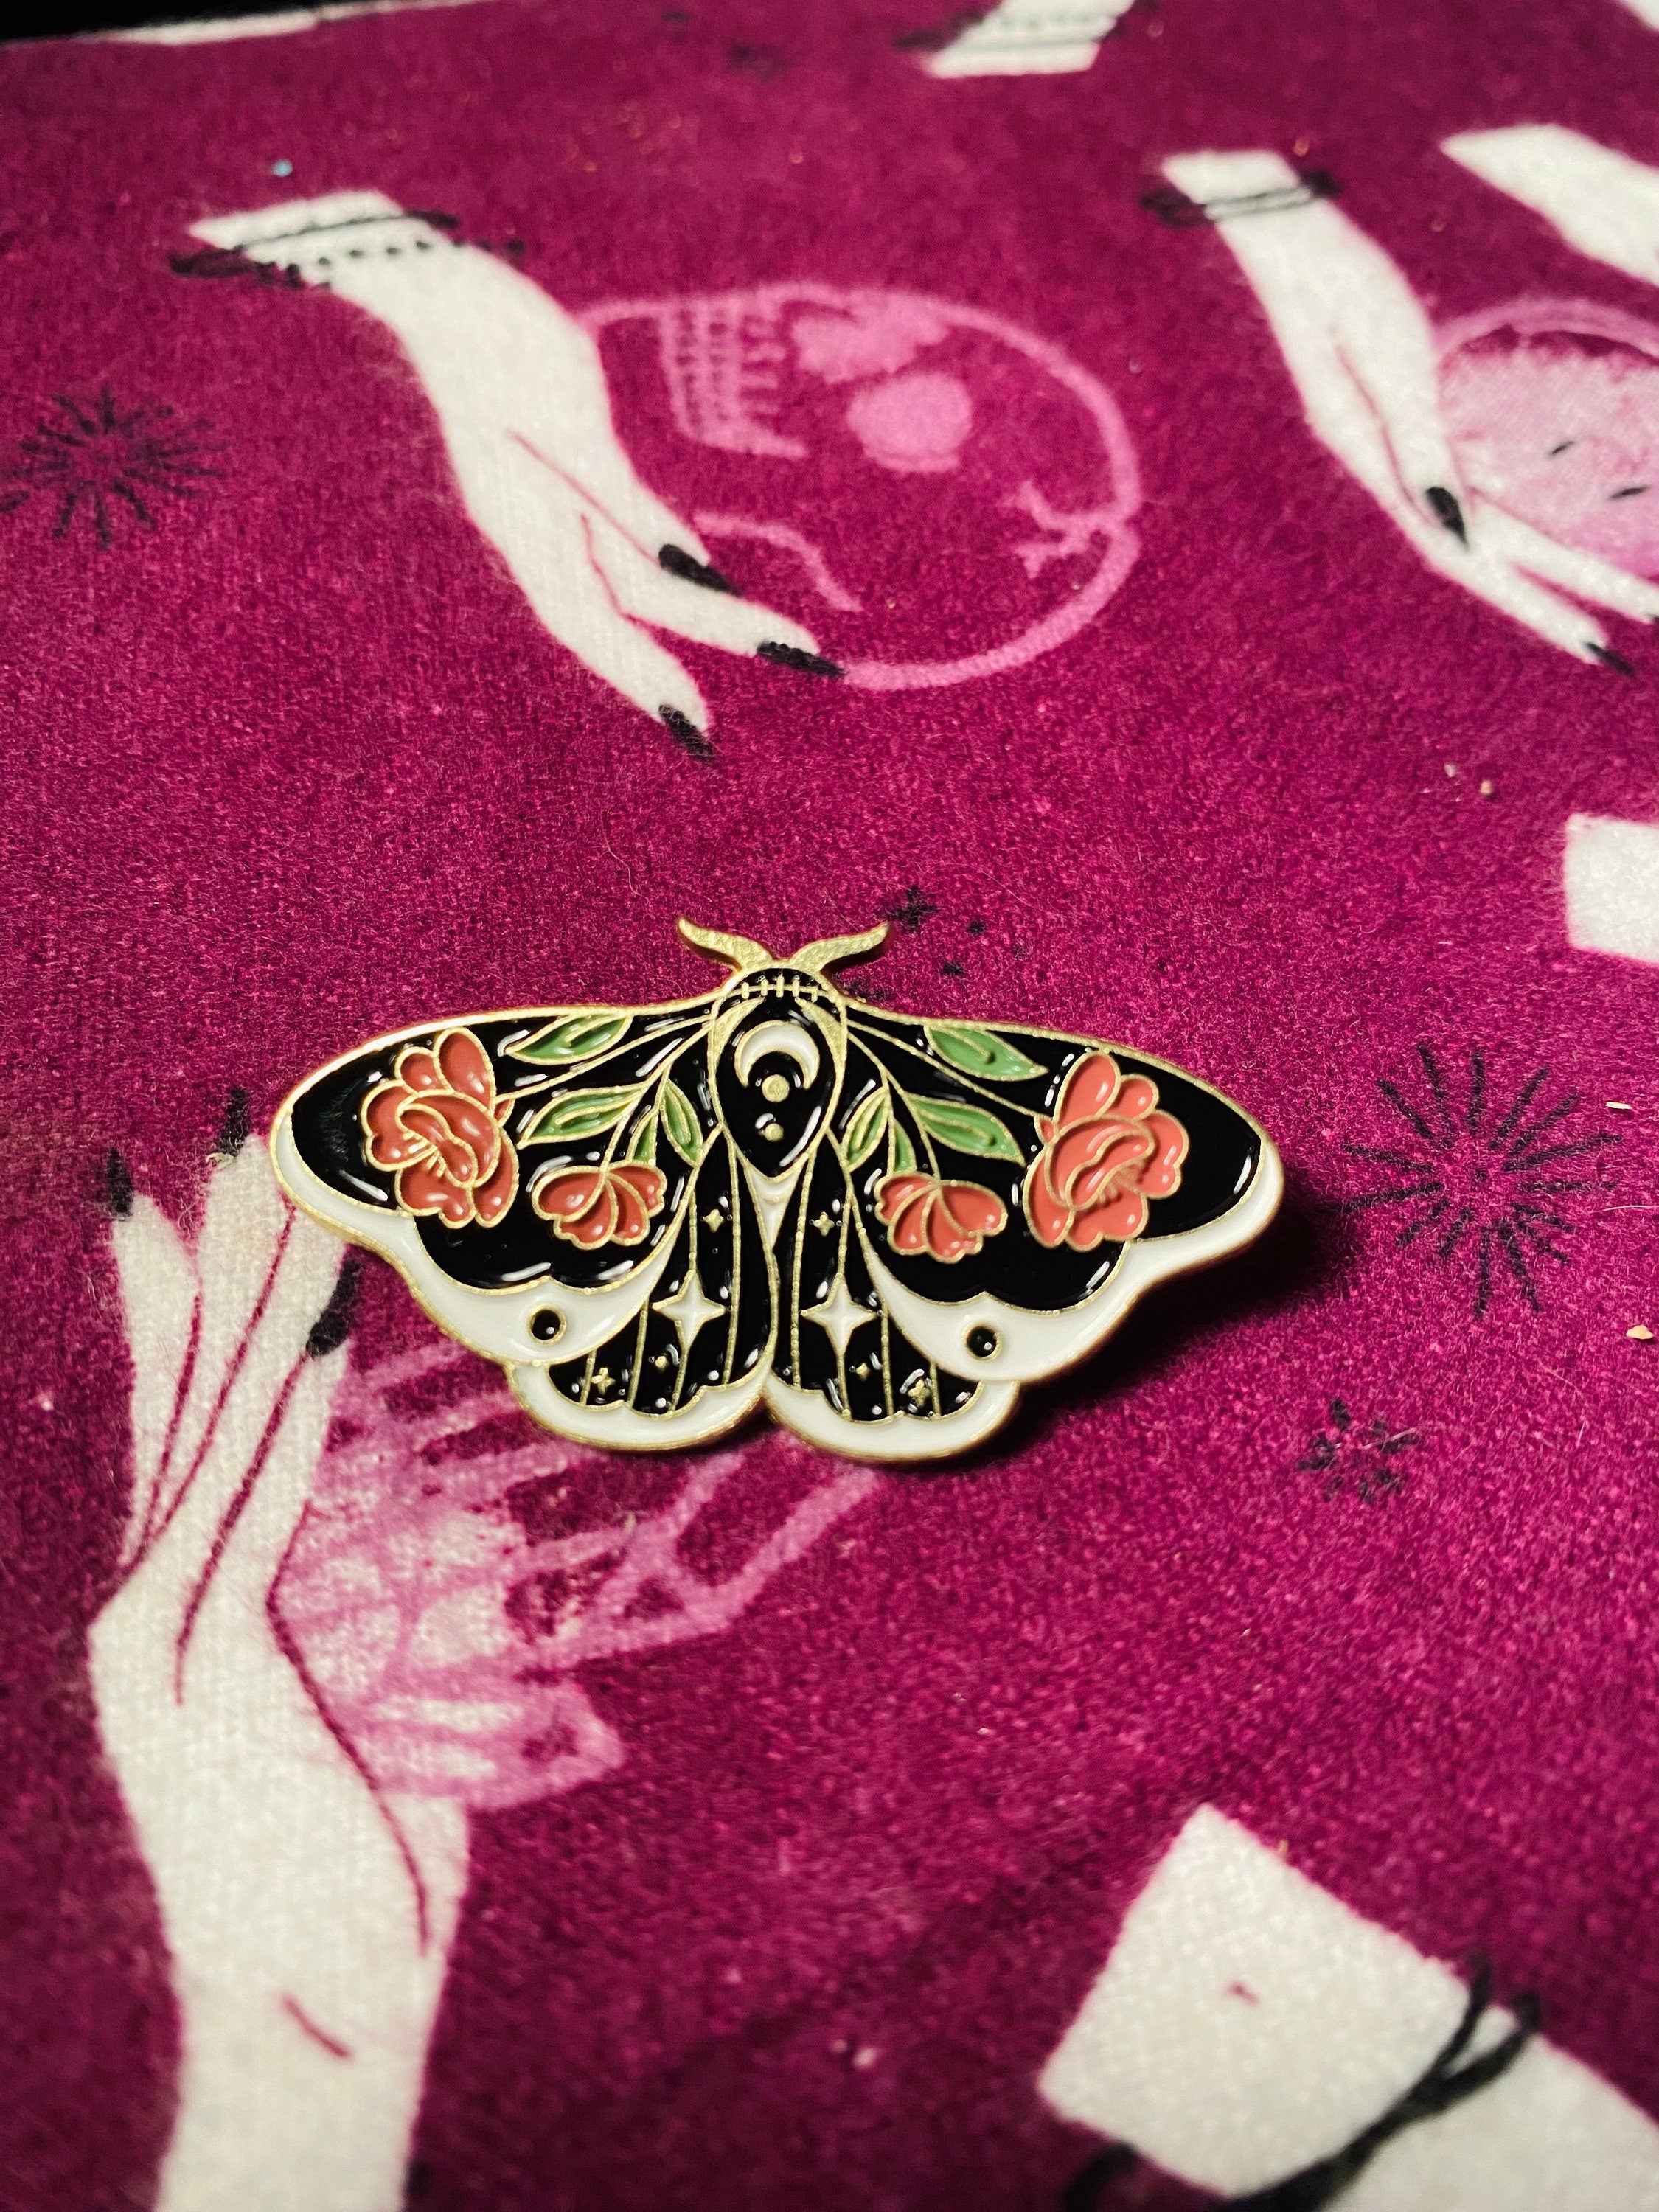 Moth and Butterfly pins - Sunlitsage